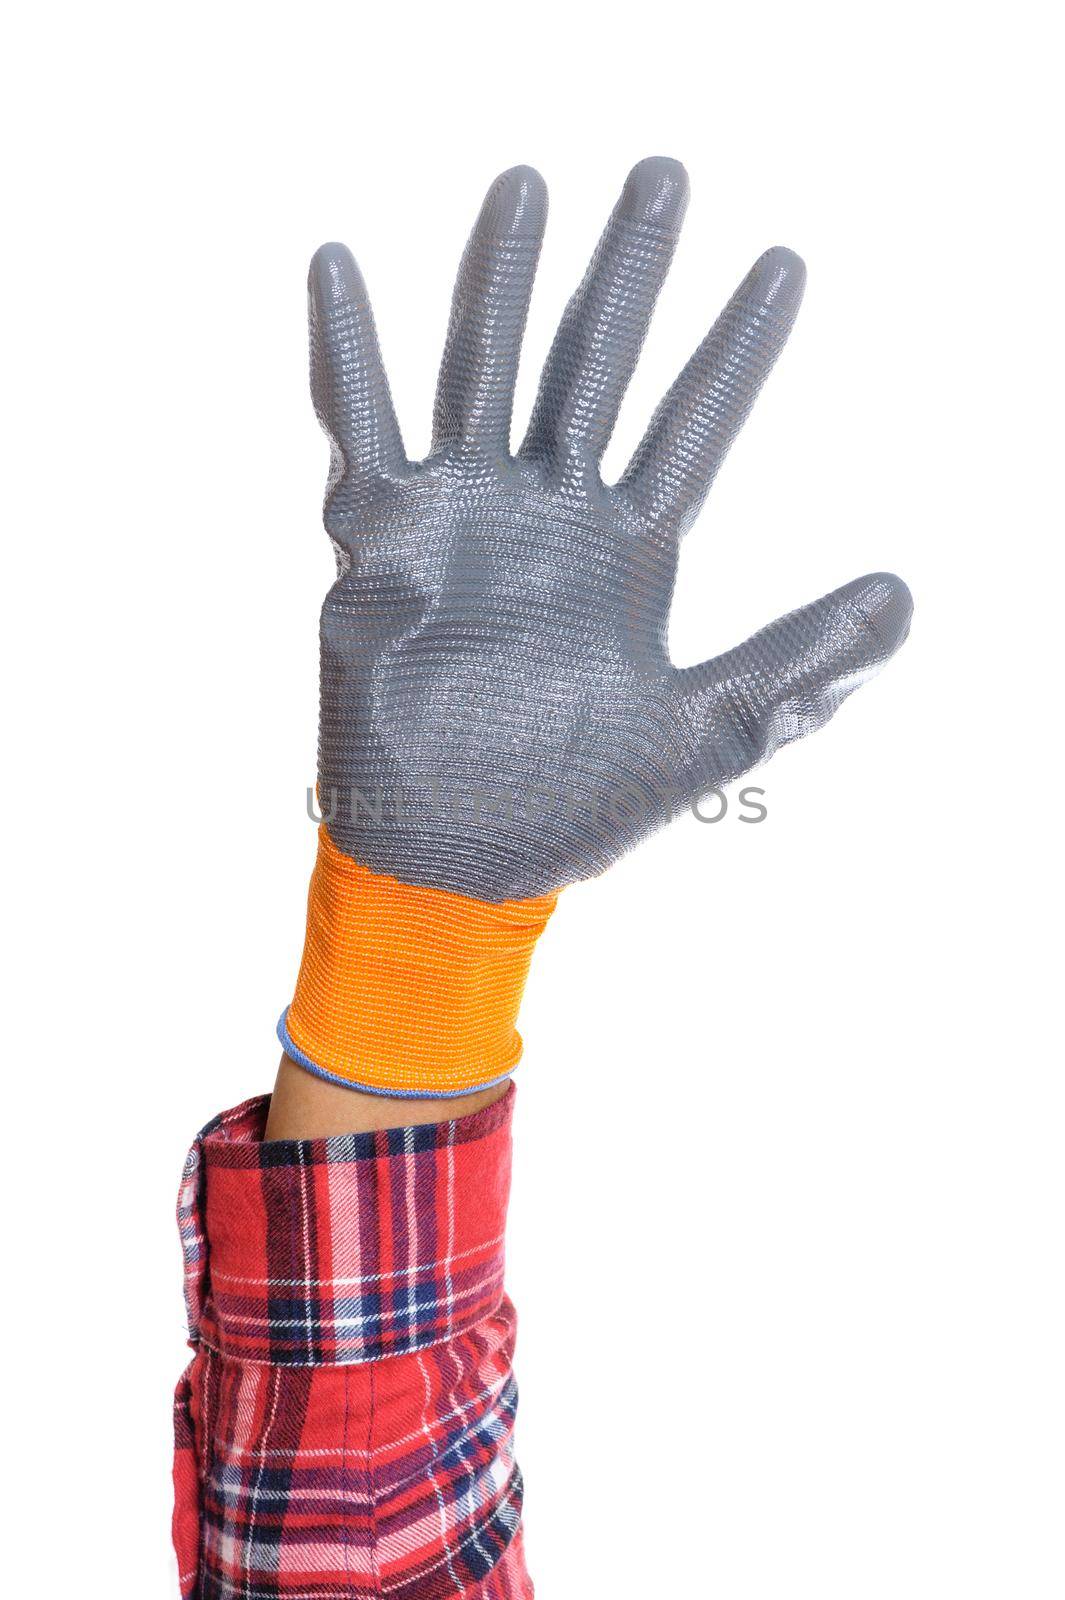 the all purpose gloves with non-slip rubber coated.